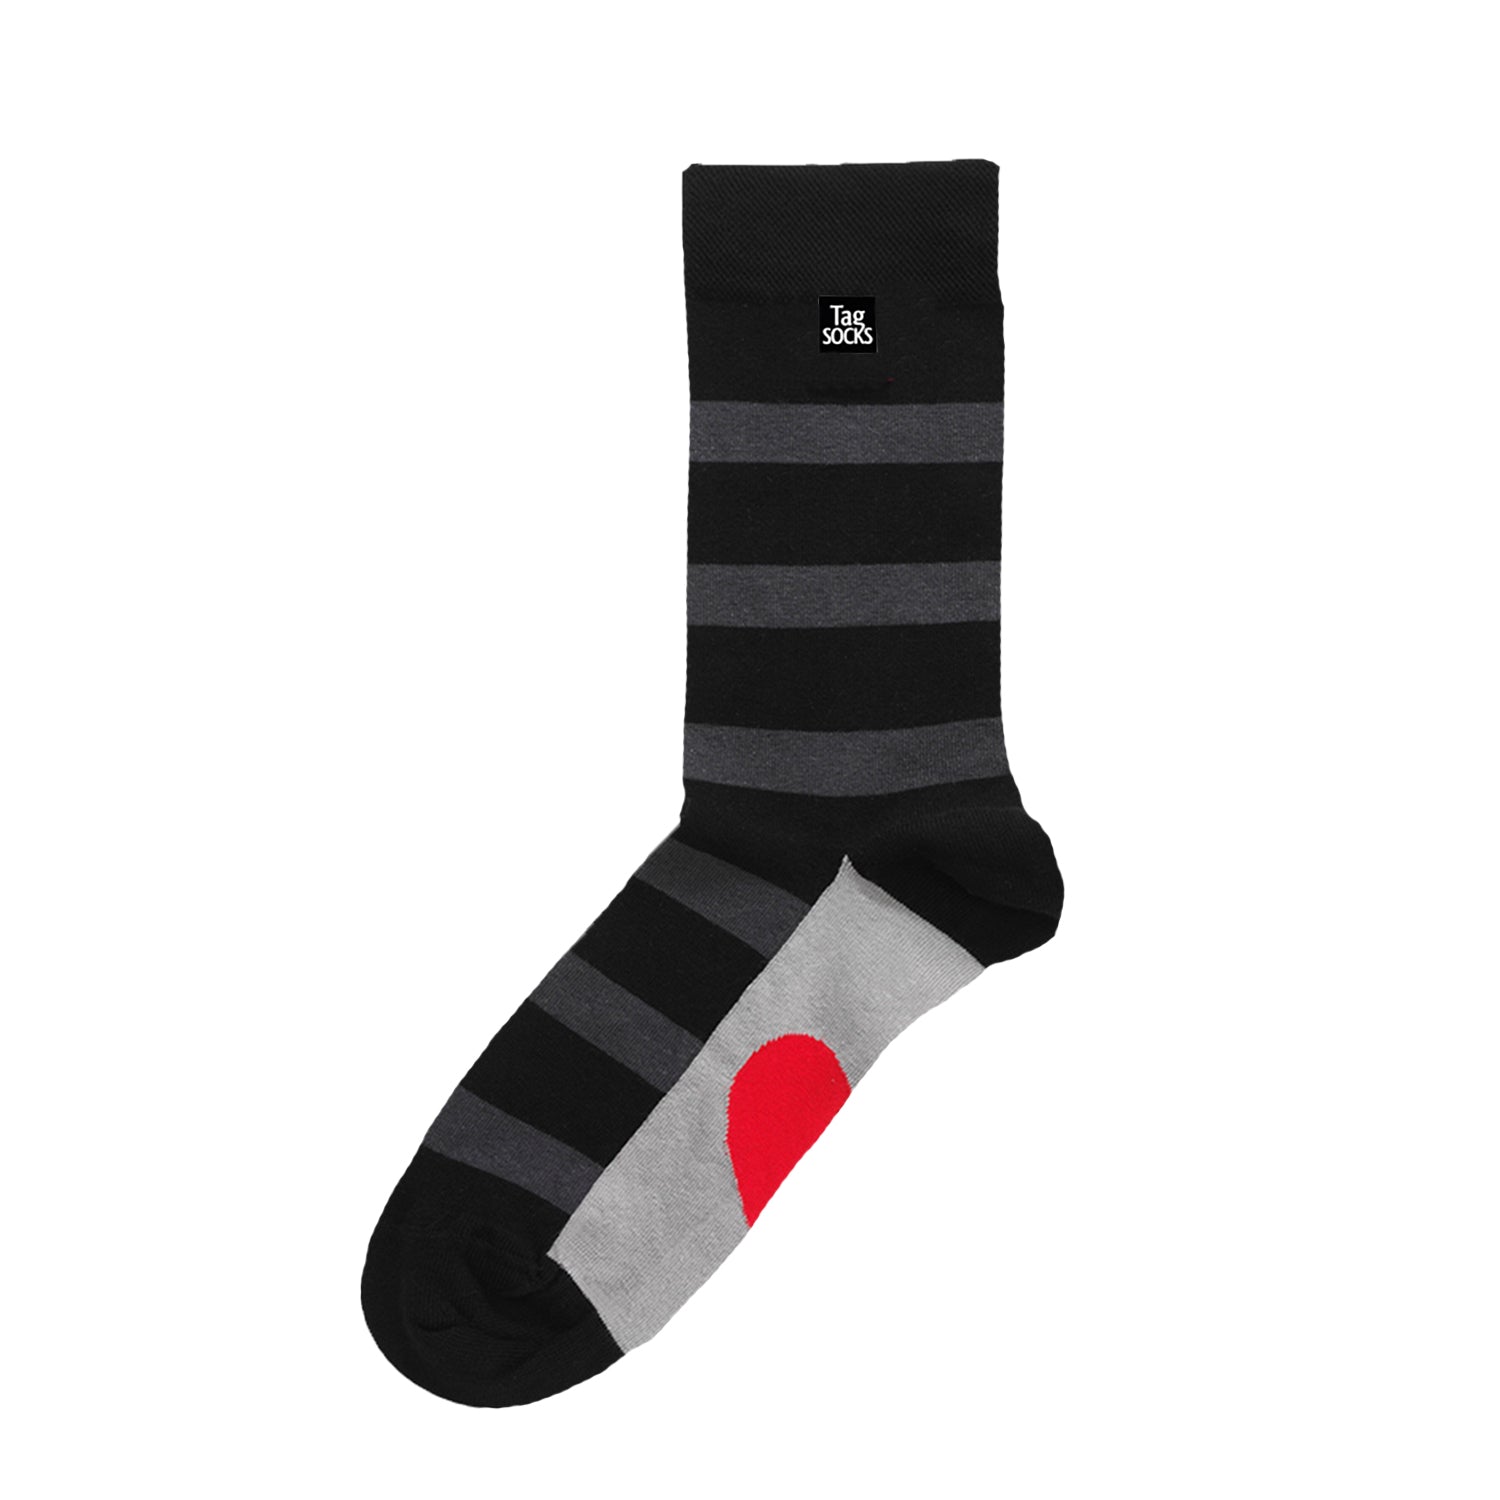 Black and grey sock from tag socks